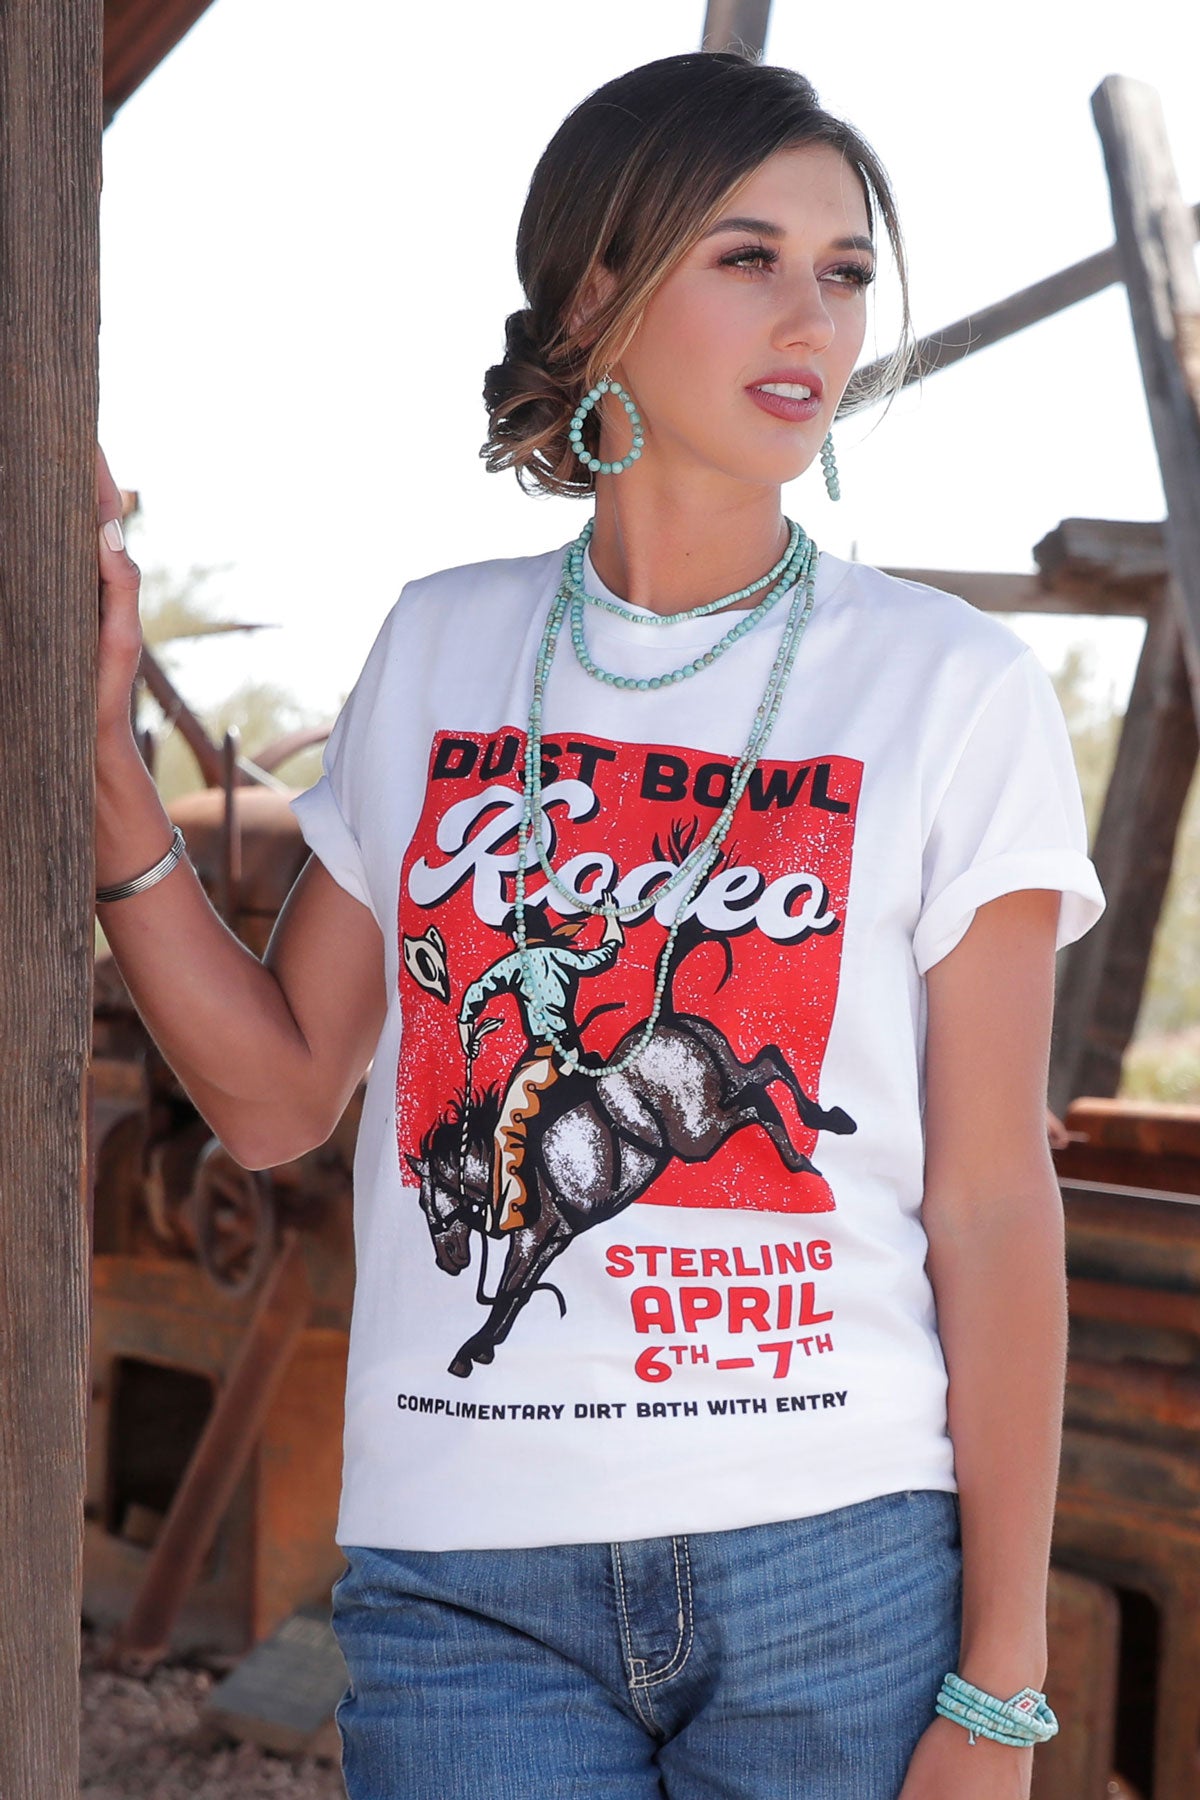 "Dust Bowl Rodeo" tee